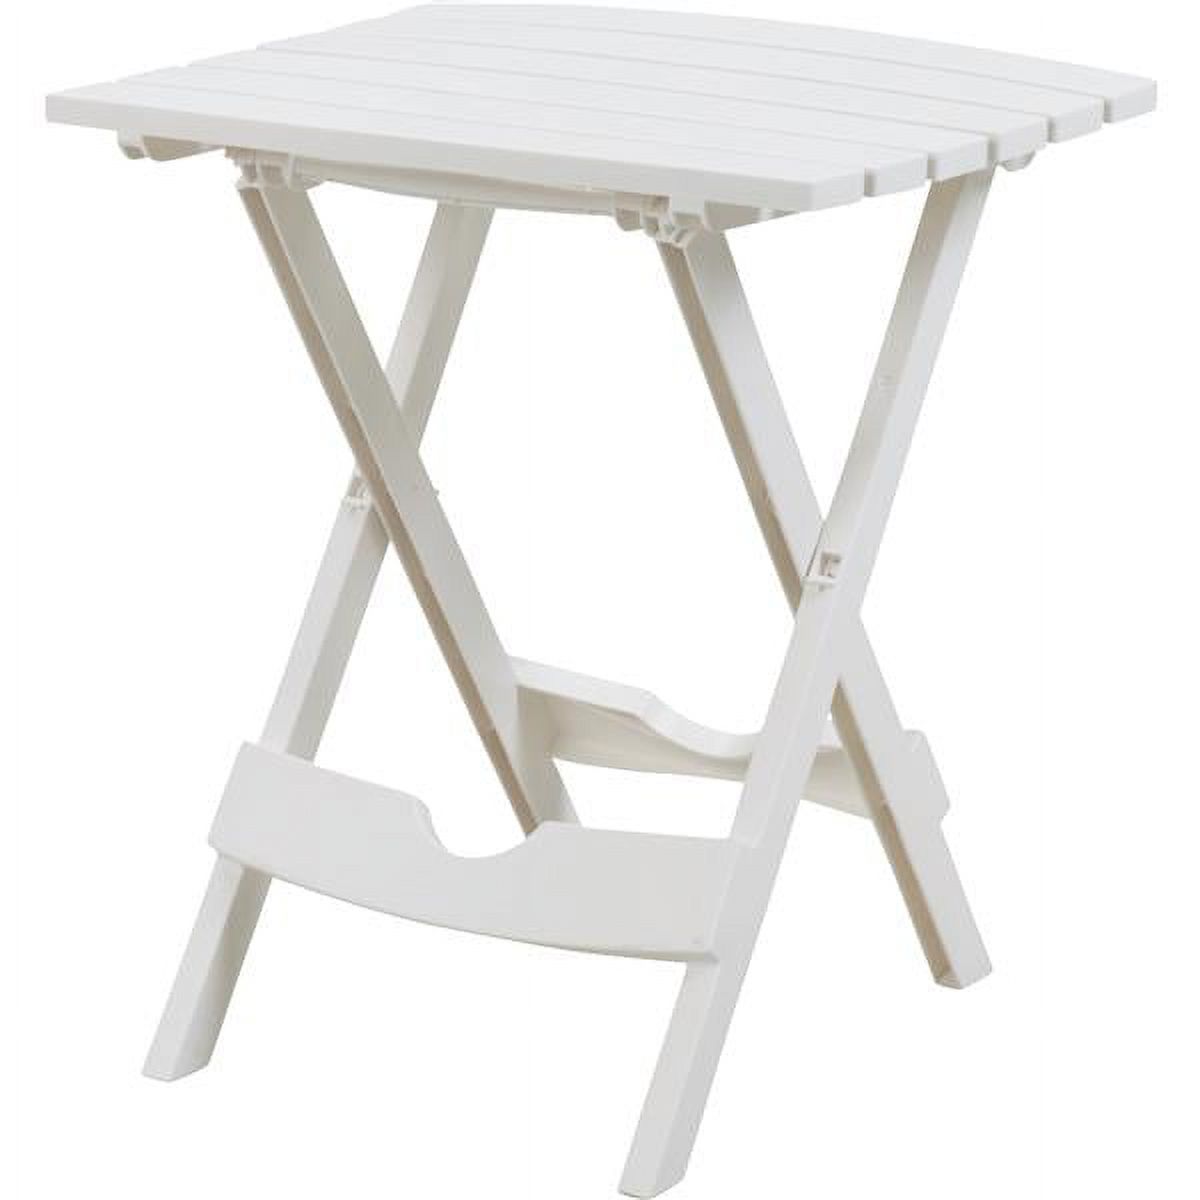 Adams Manufacturing Quik-Fold Side Table-White - image 1 of 6